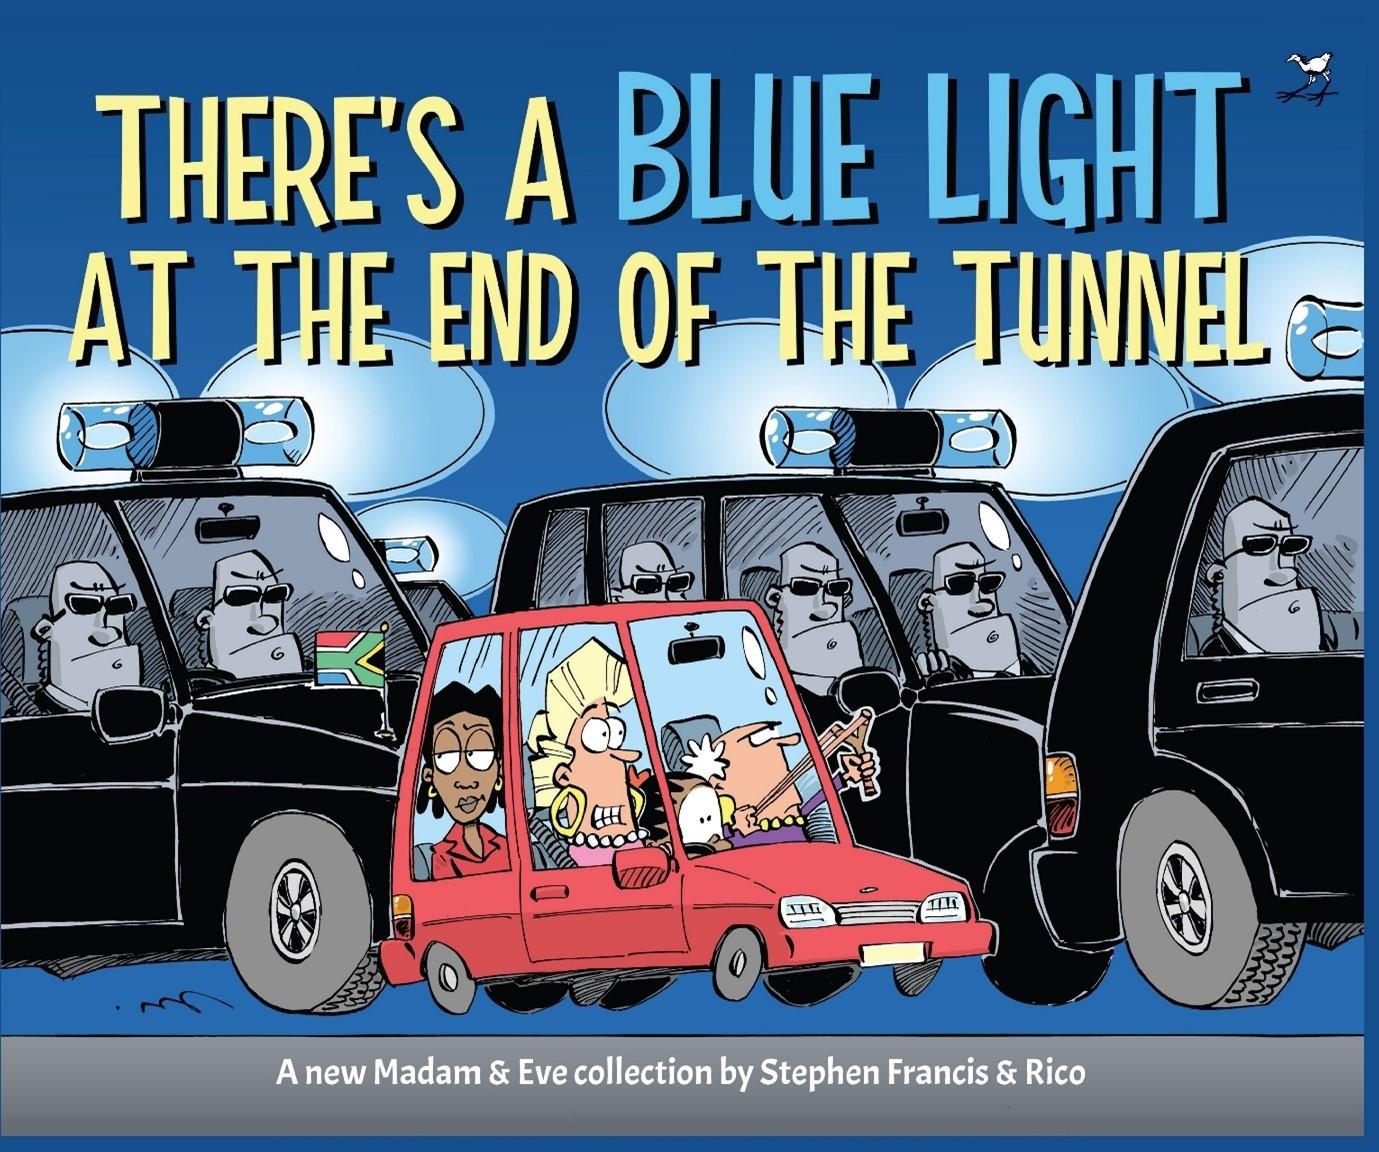 There's a blue light at the end of the tunnel